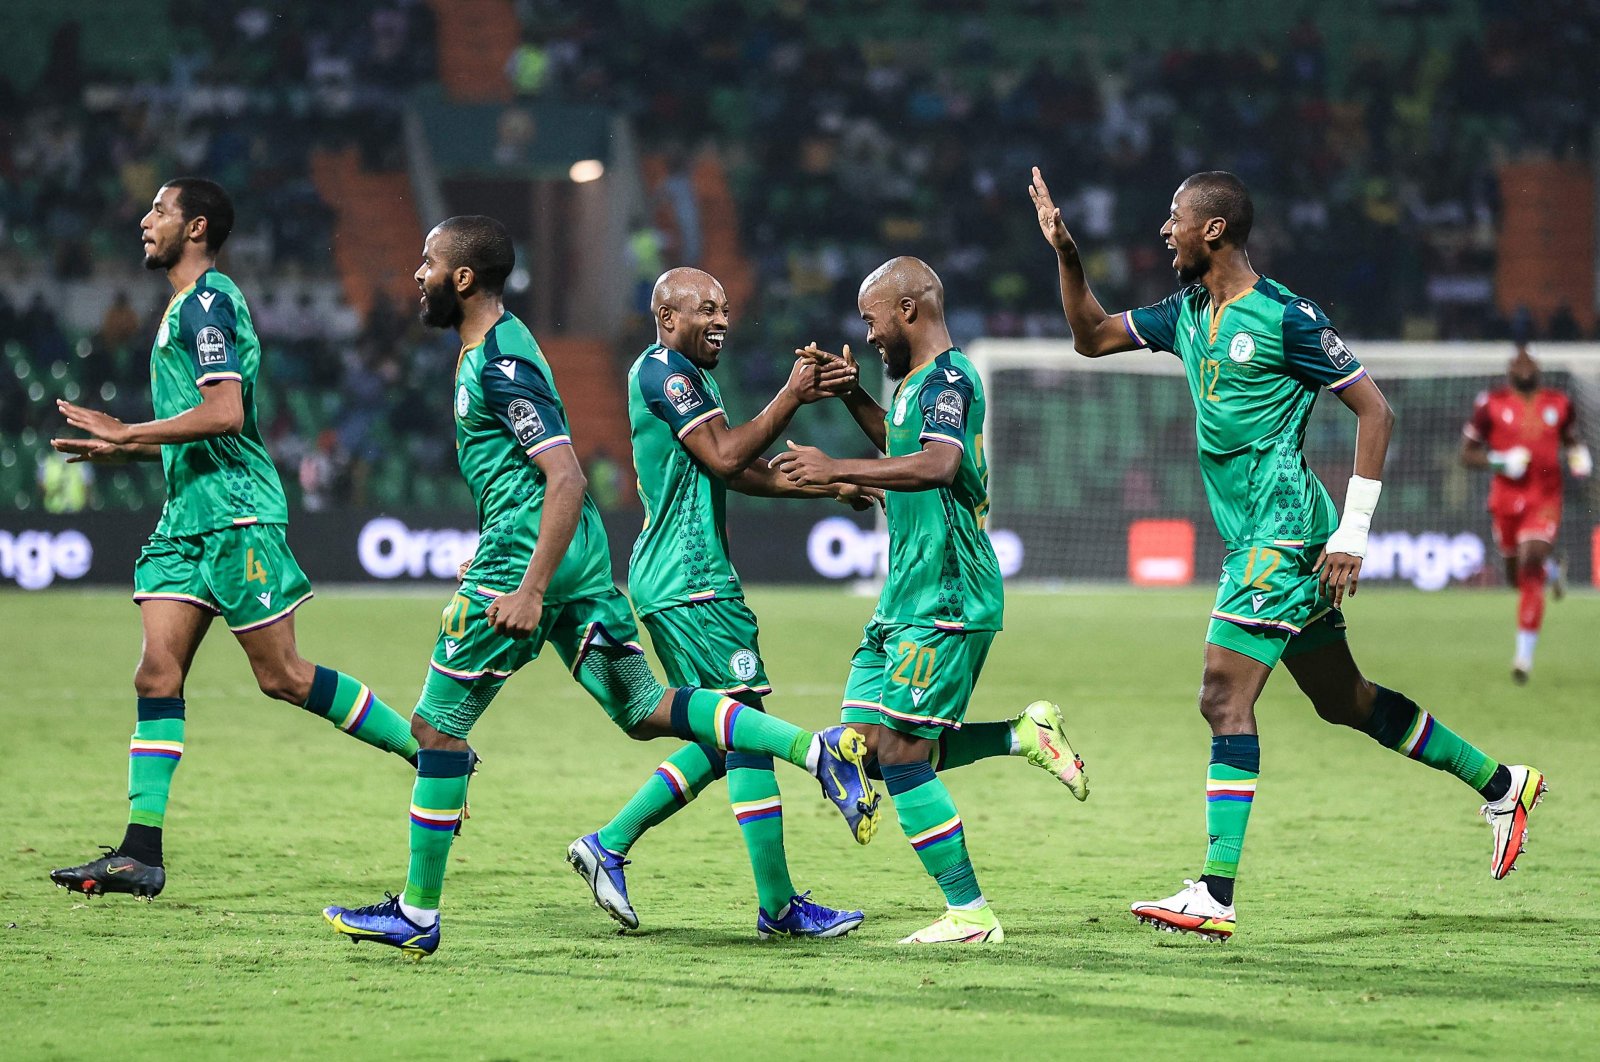 Comoros forward Ahmed Mogni (2nd R) celebrates with teammates after scoring a goal in an Africa Cup of Nations 2021 match against Ghana, Garoua, Cameroon, Jan. 18, 2022. (AFP Photo)